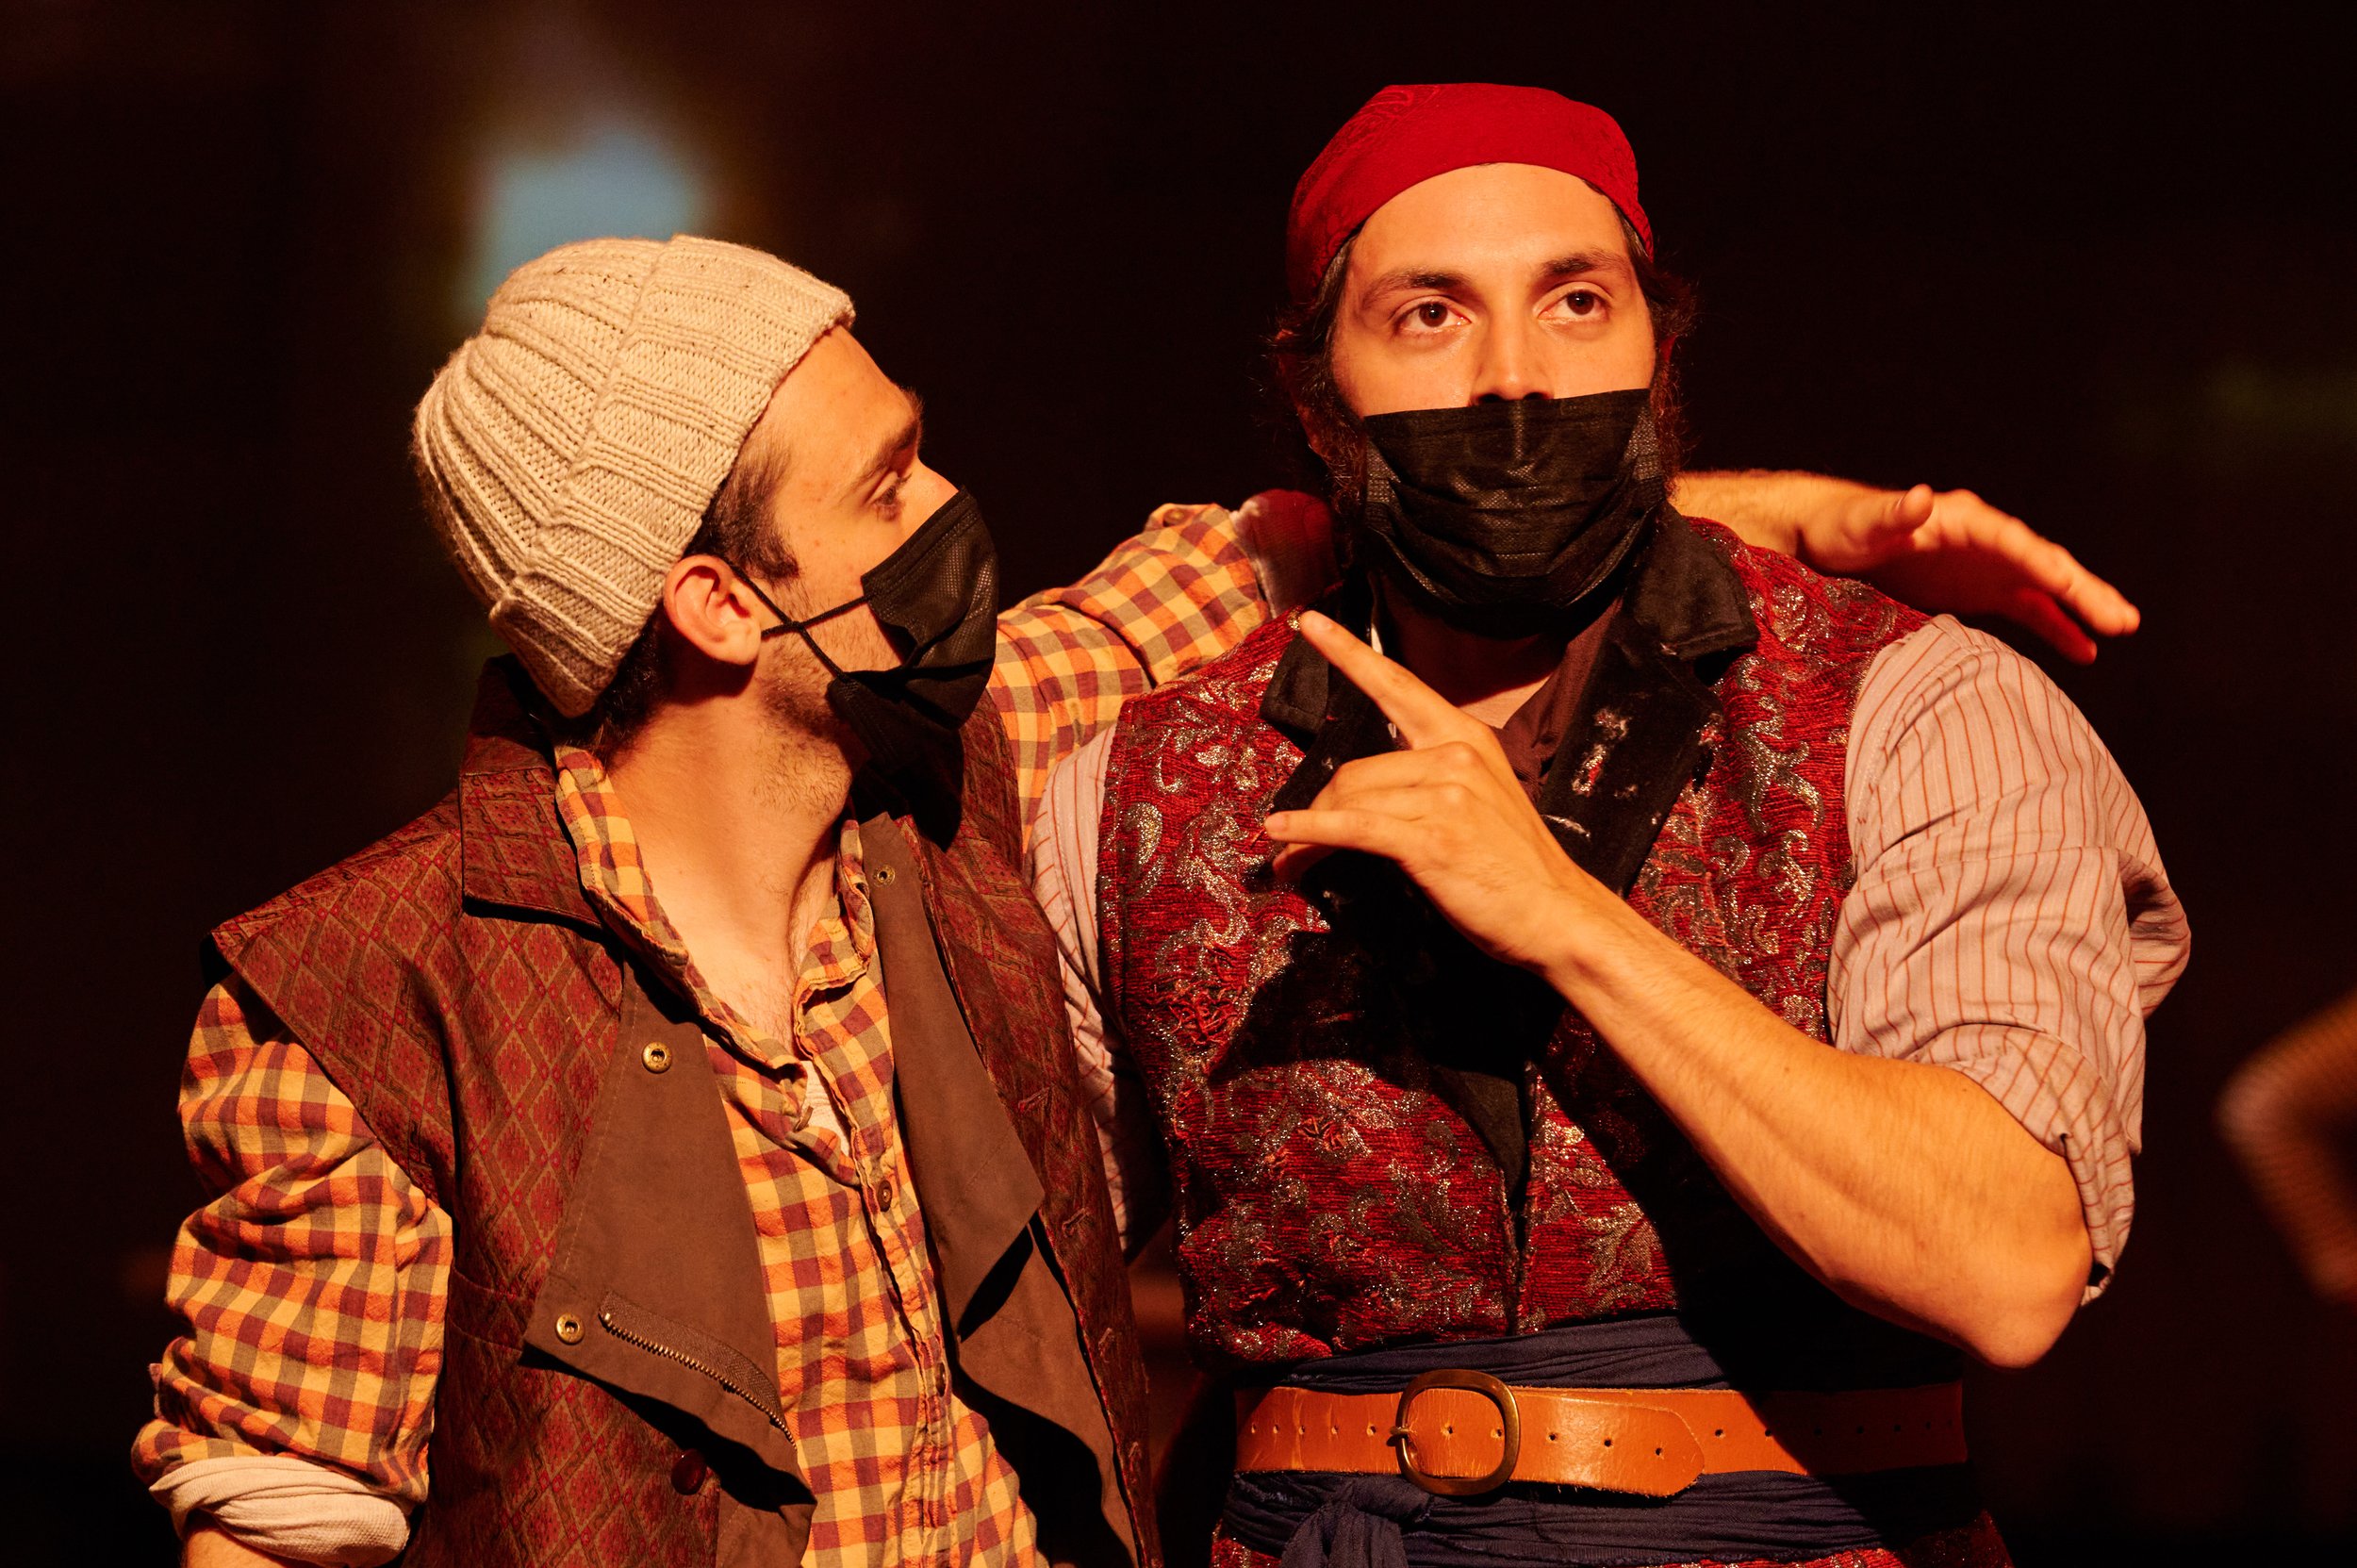  Ryan Del Papa and Ryan Dylan Wargnier during rehearsal of the Santa Monica College Theatre Arts production of "Treasure Island" at the SMC Main Stage on Tuesday, May 17, 2022, in Santa Monica, Calif. (Nicholas McCall | The Corsair) 